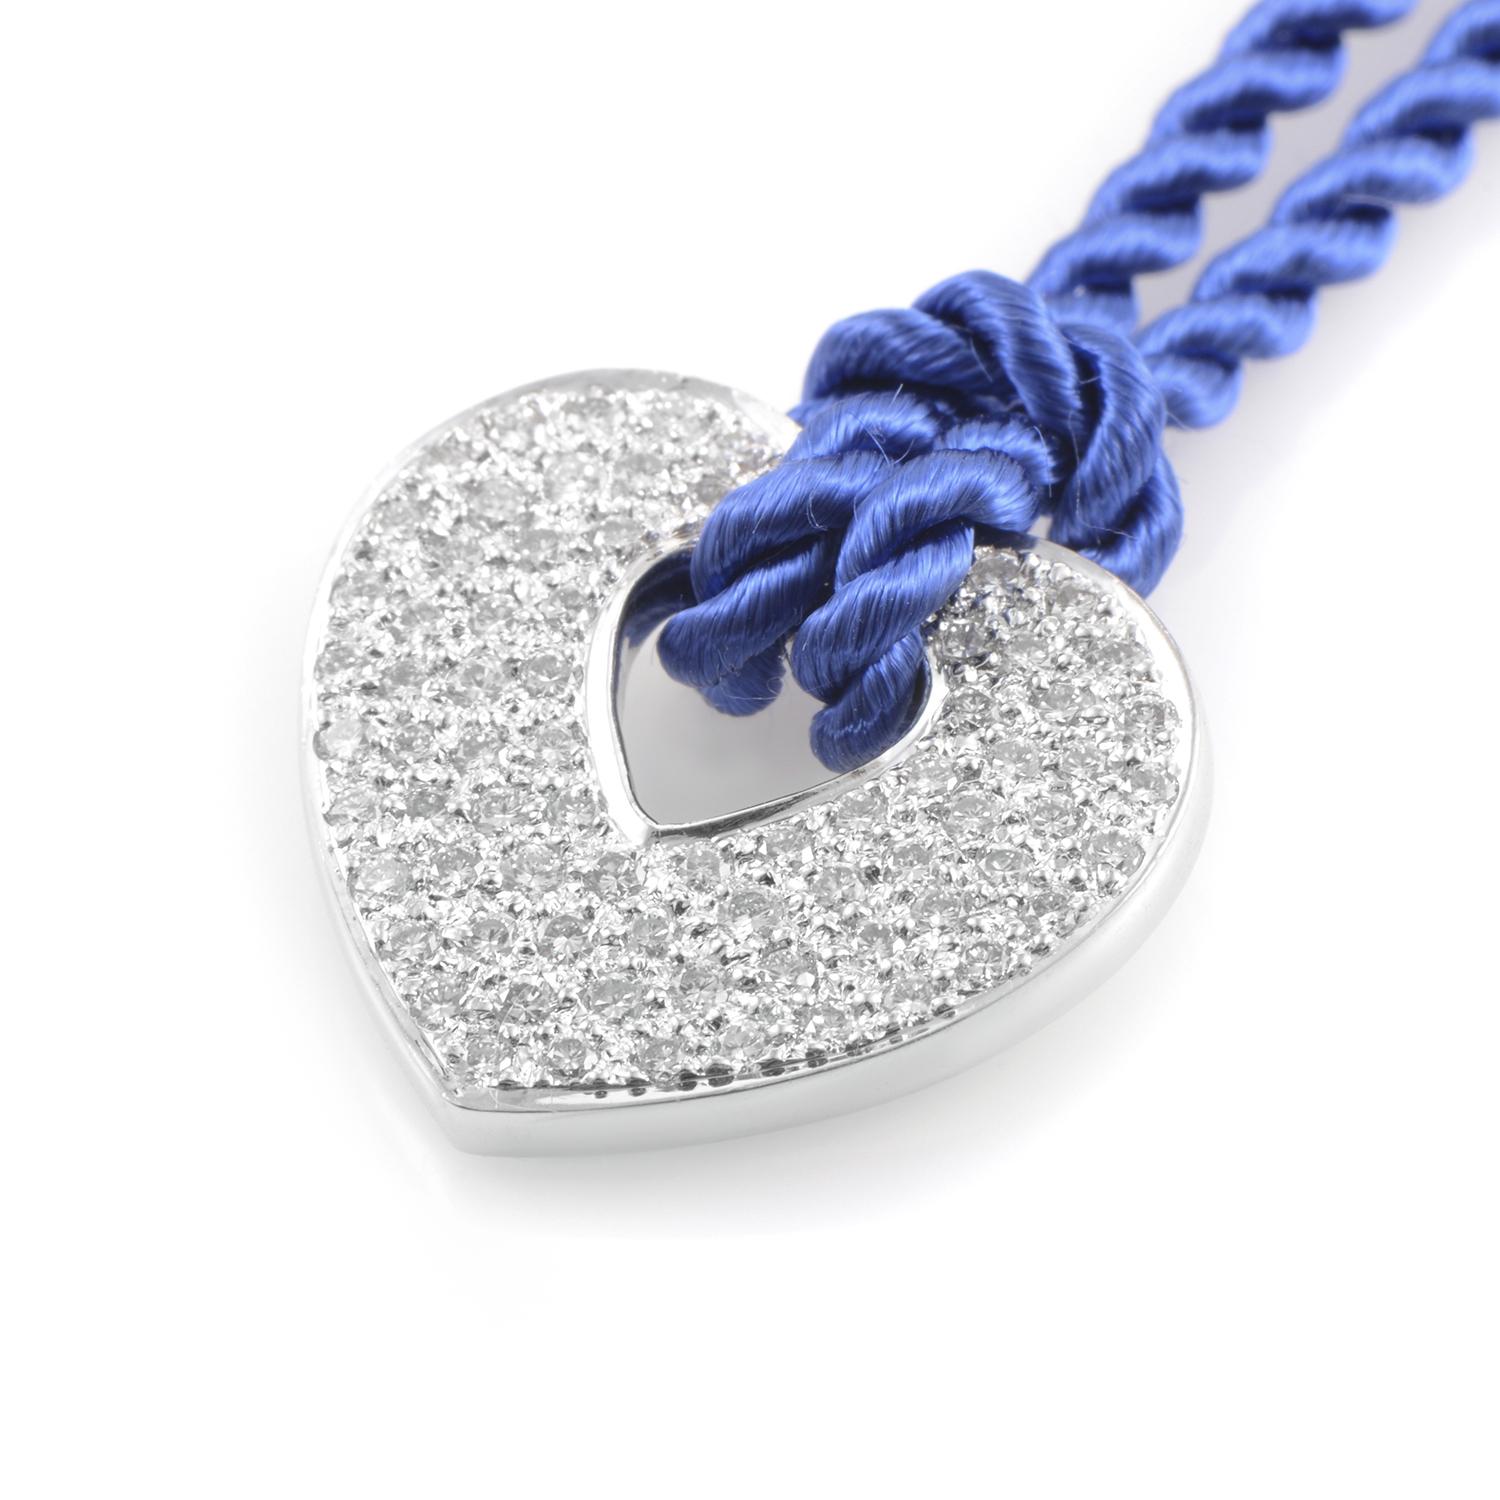 This simplistic yet stunning necklace is a charming example of Poiray elegance. The high quality royal blue rope-cord necklace lovingly embraces the 18K white gold pendant that is beautifully encrusted with ~.76ct of diamonds in a dazzling pavé